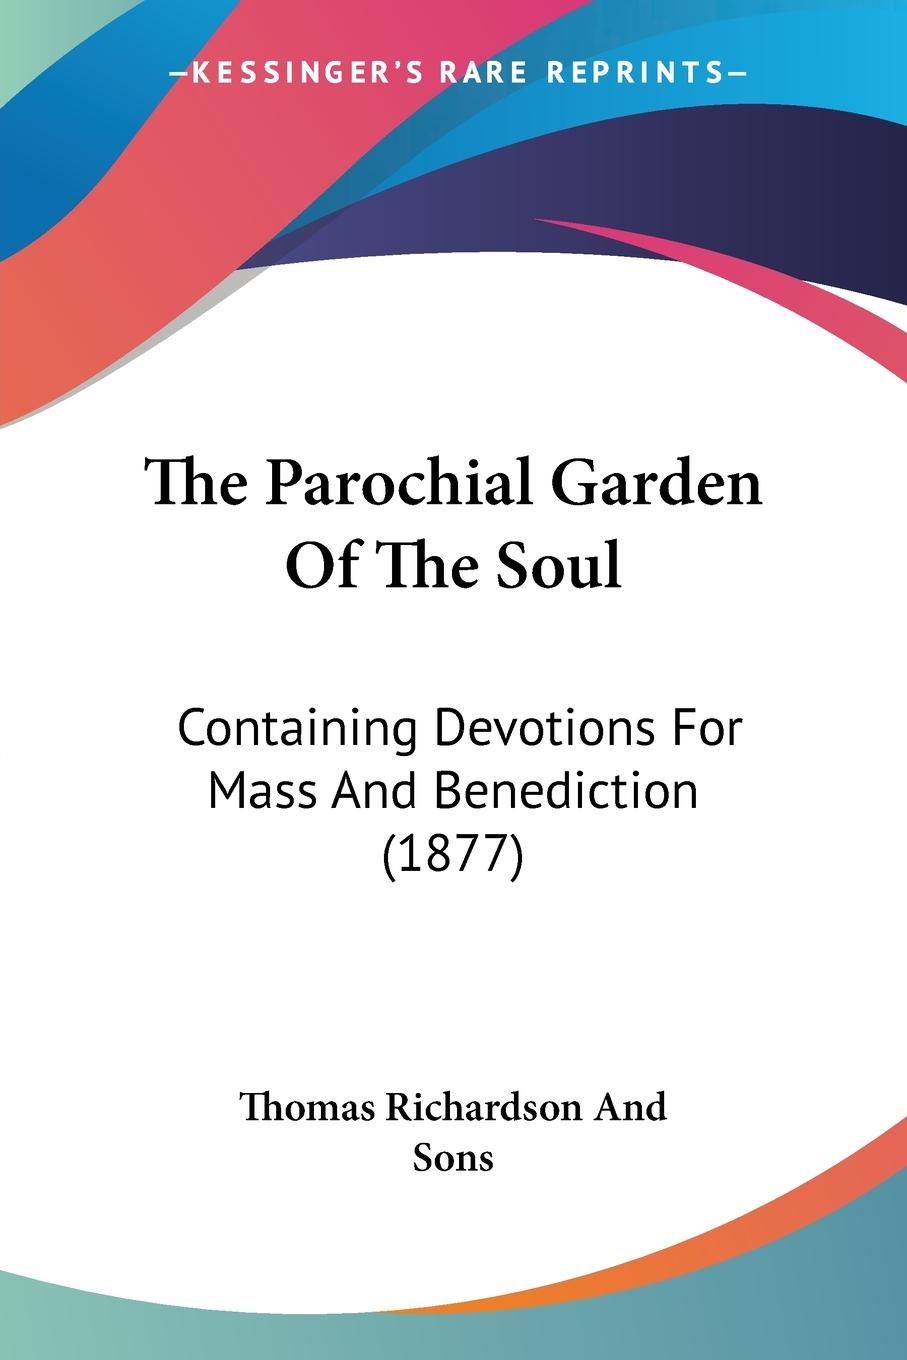 The Parochial Garden Of The Soul - Thomas Richardson And Sons